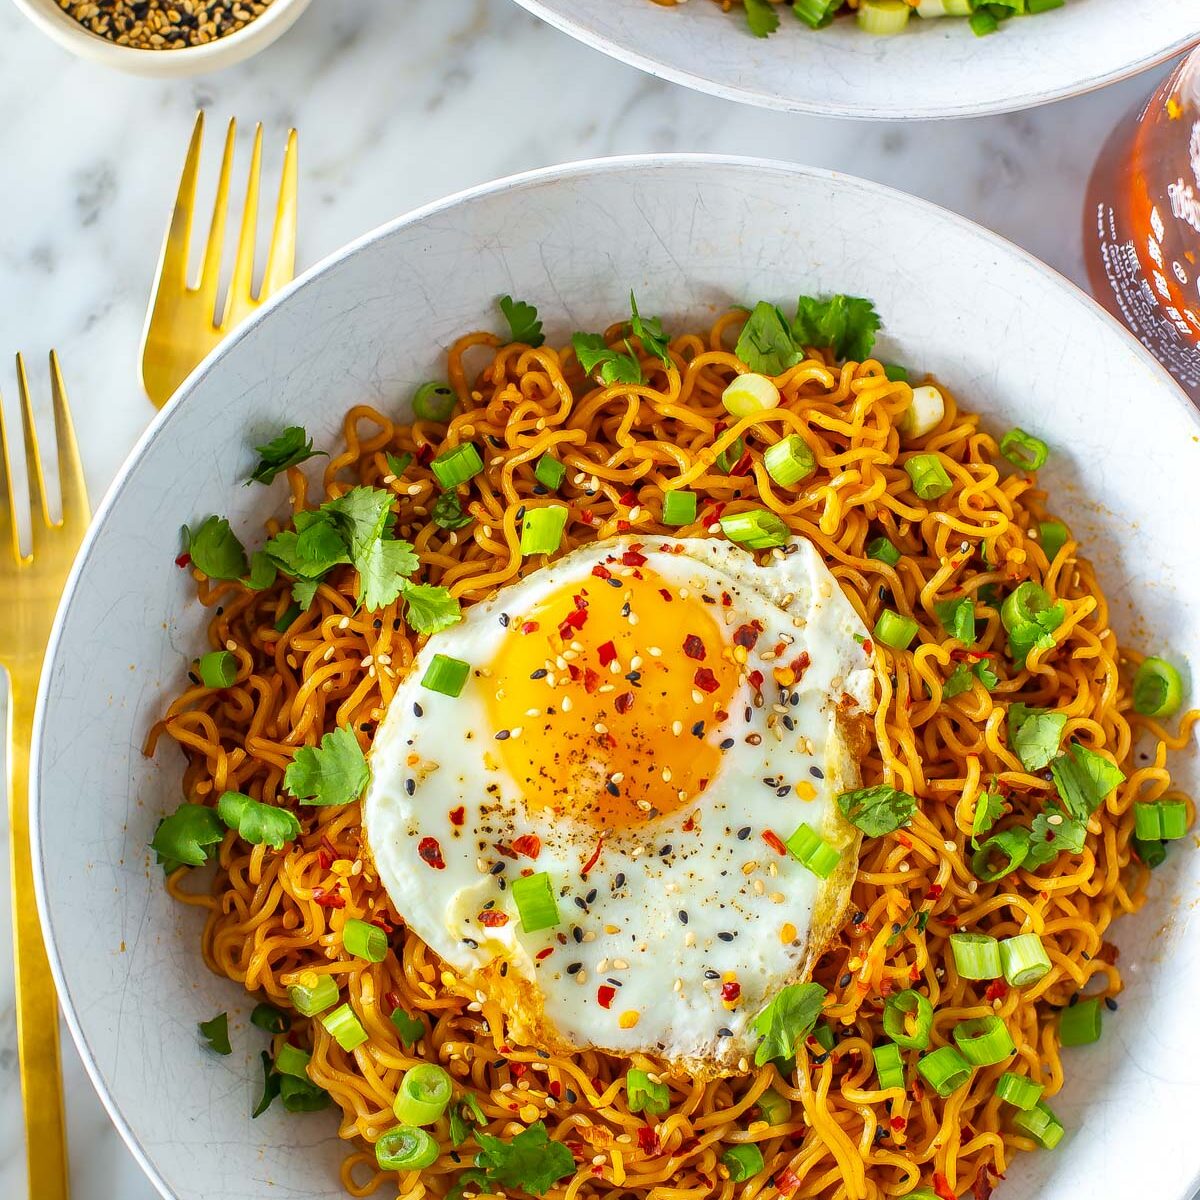 A close-up of a bowl of spicy noodles topped with a fried egg, green onions and cilantro.